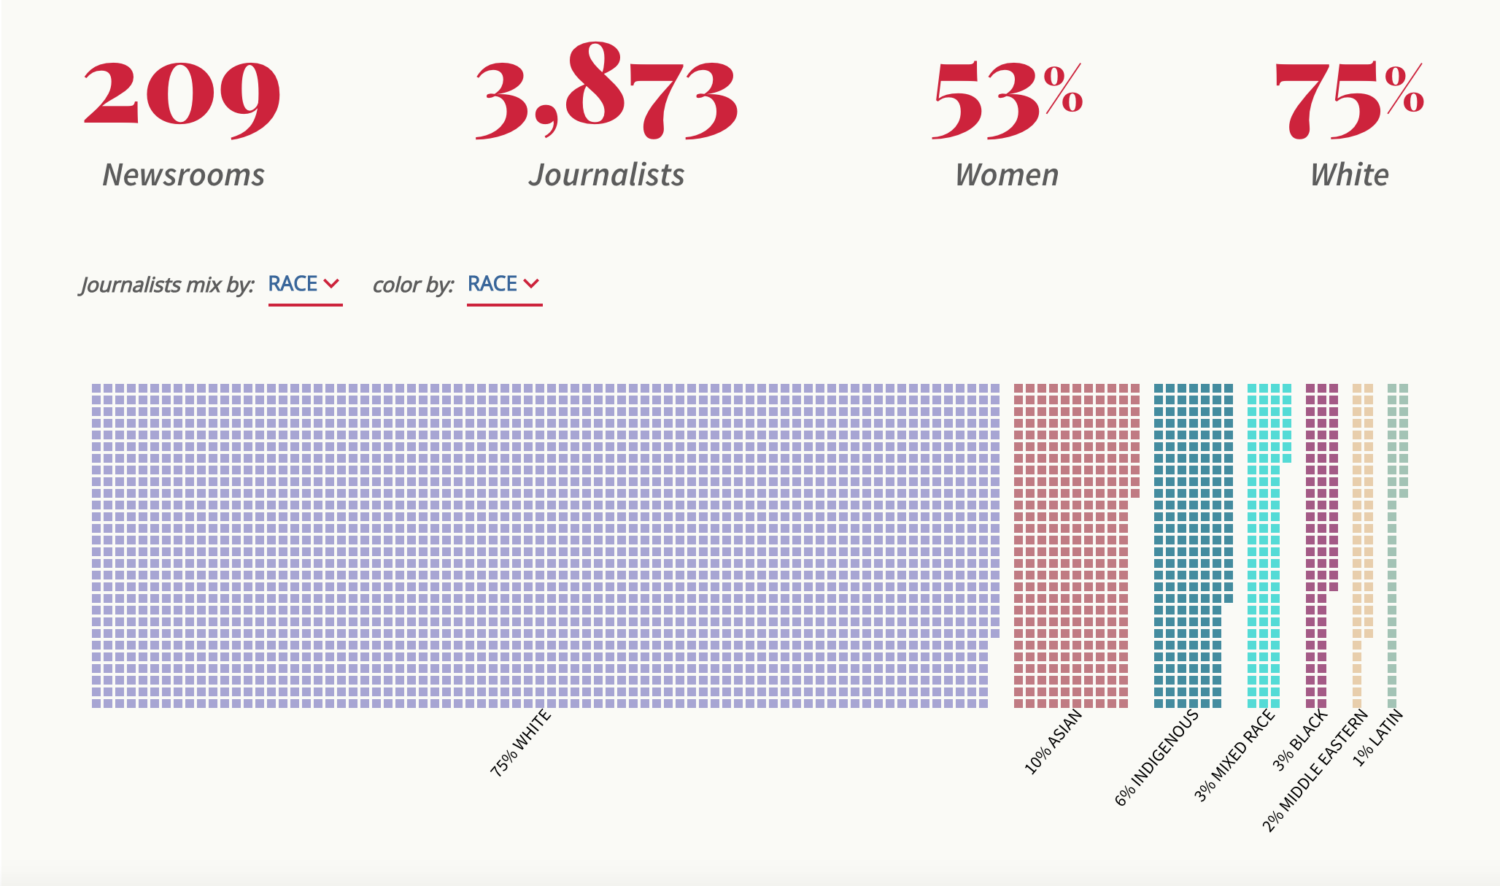 Data visualization of CAJ survey results reflecting that of 209 newsrooms and 3,873 journalists, 53% are women and 75% are white. Graphic shows option to sort by race.